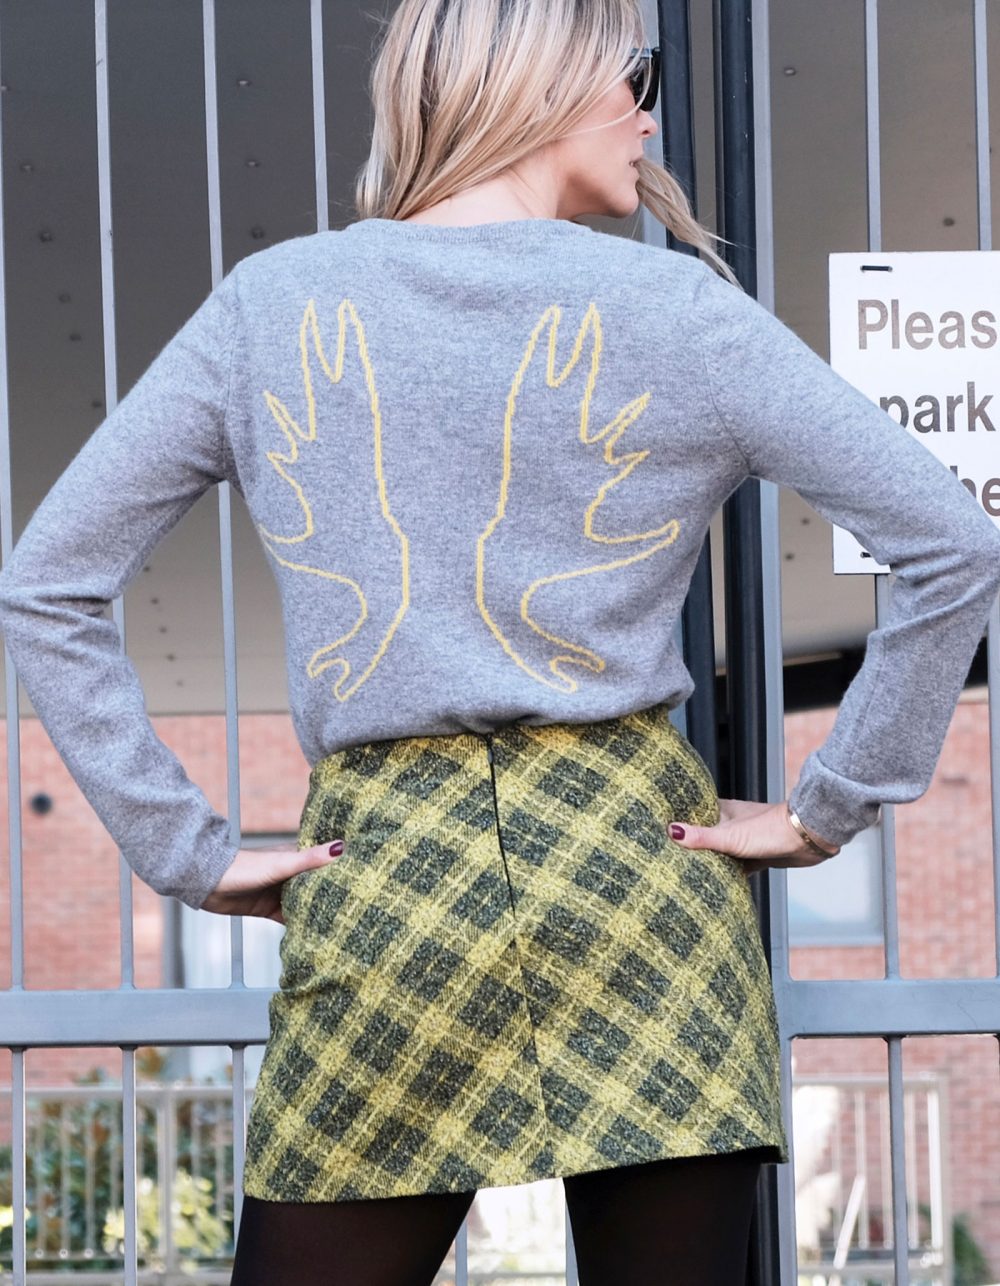 Antlers Cashmere Intarsia by Malin Darlin